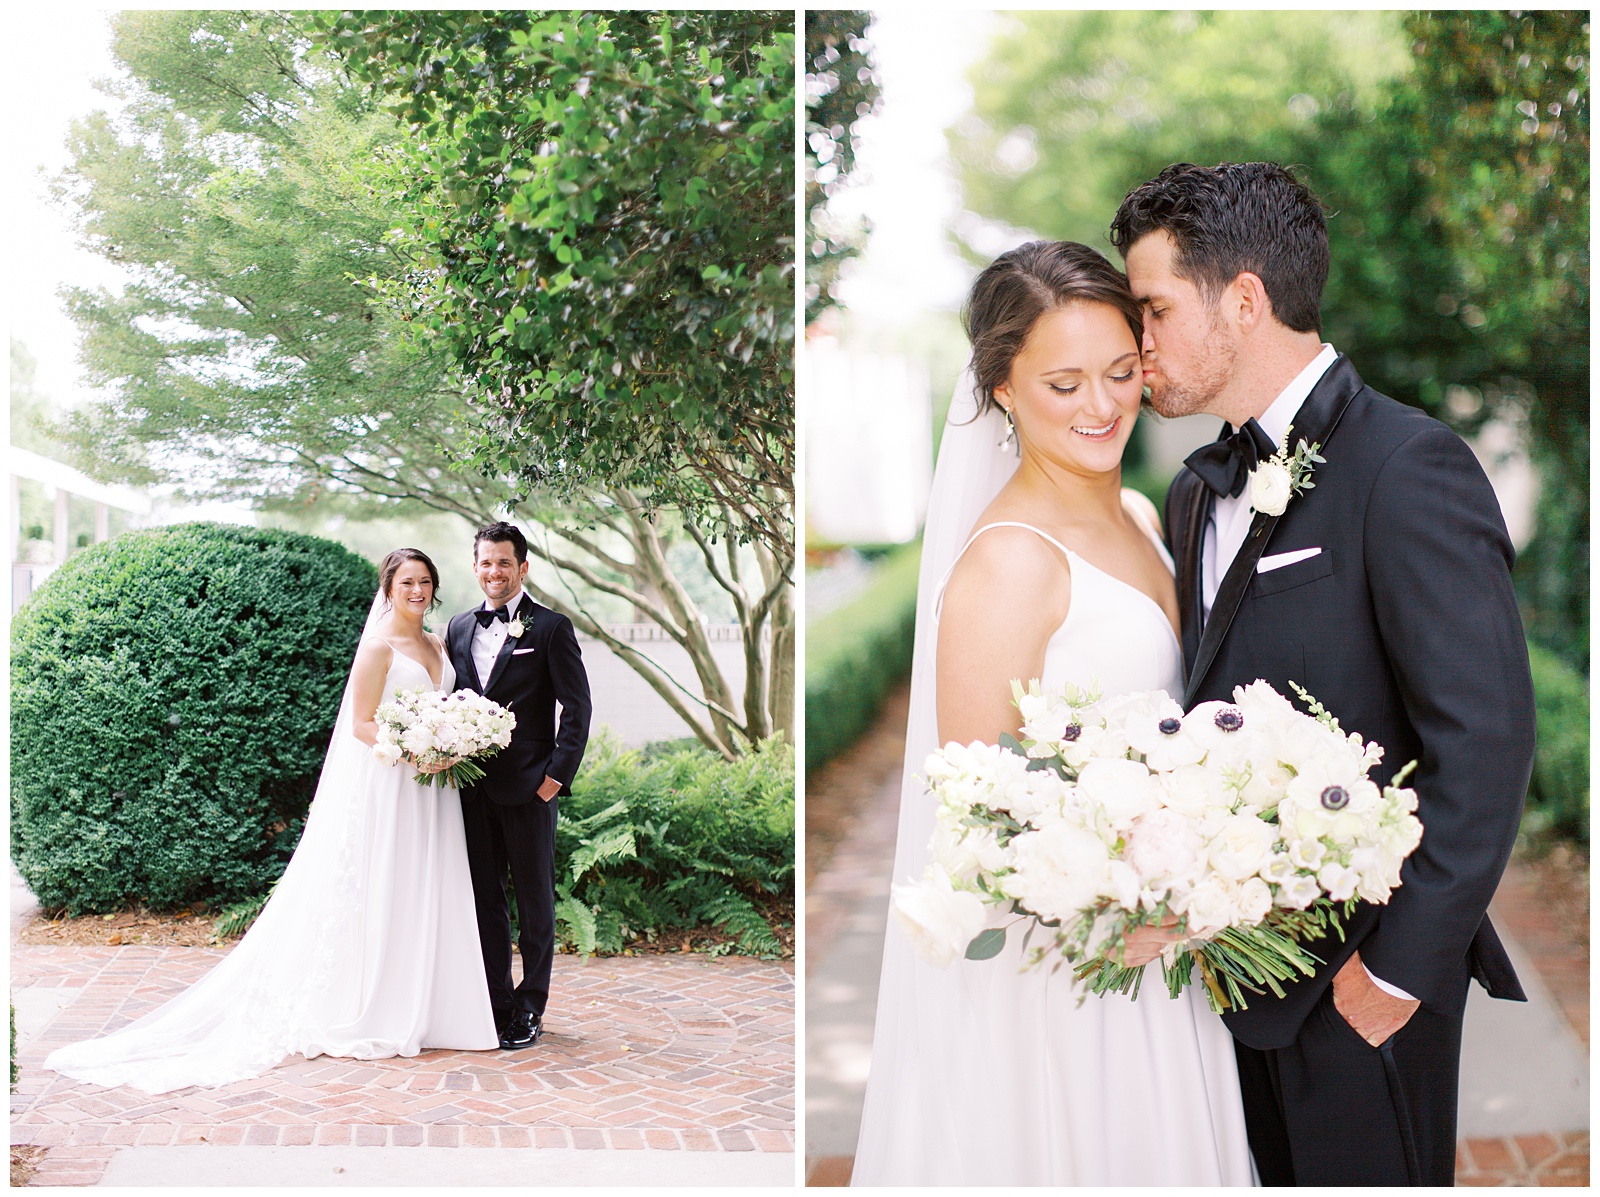 Quail Hollow Country Club wedding portraits of bride and groom